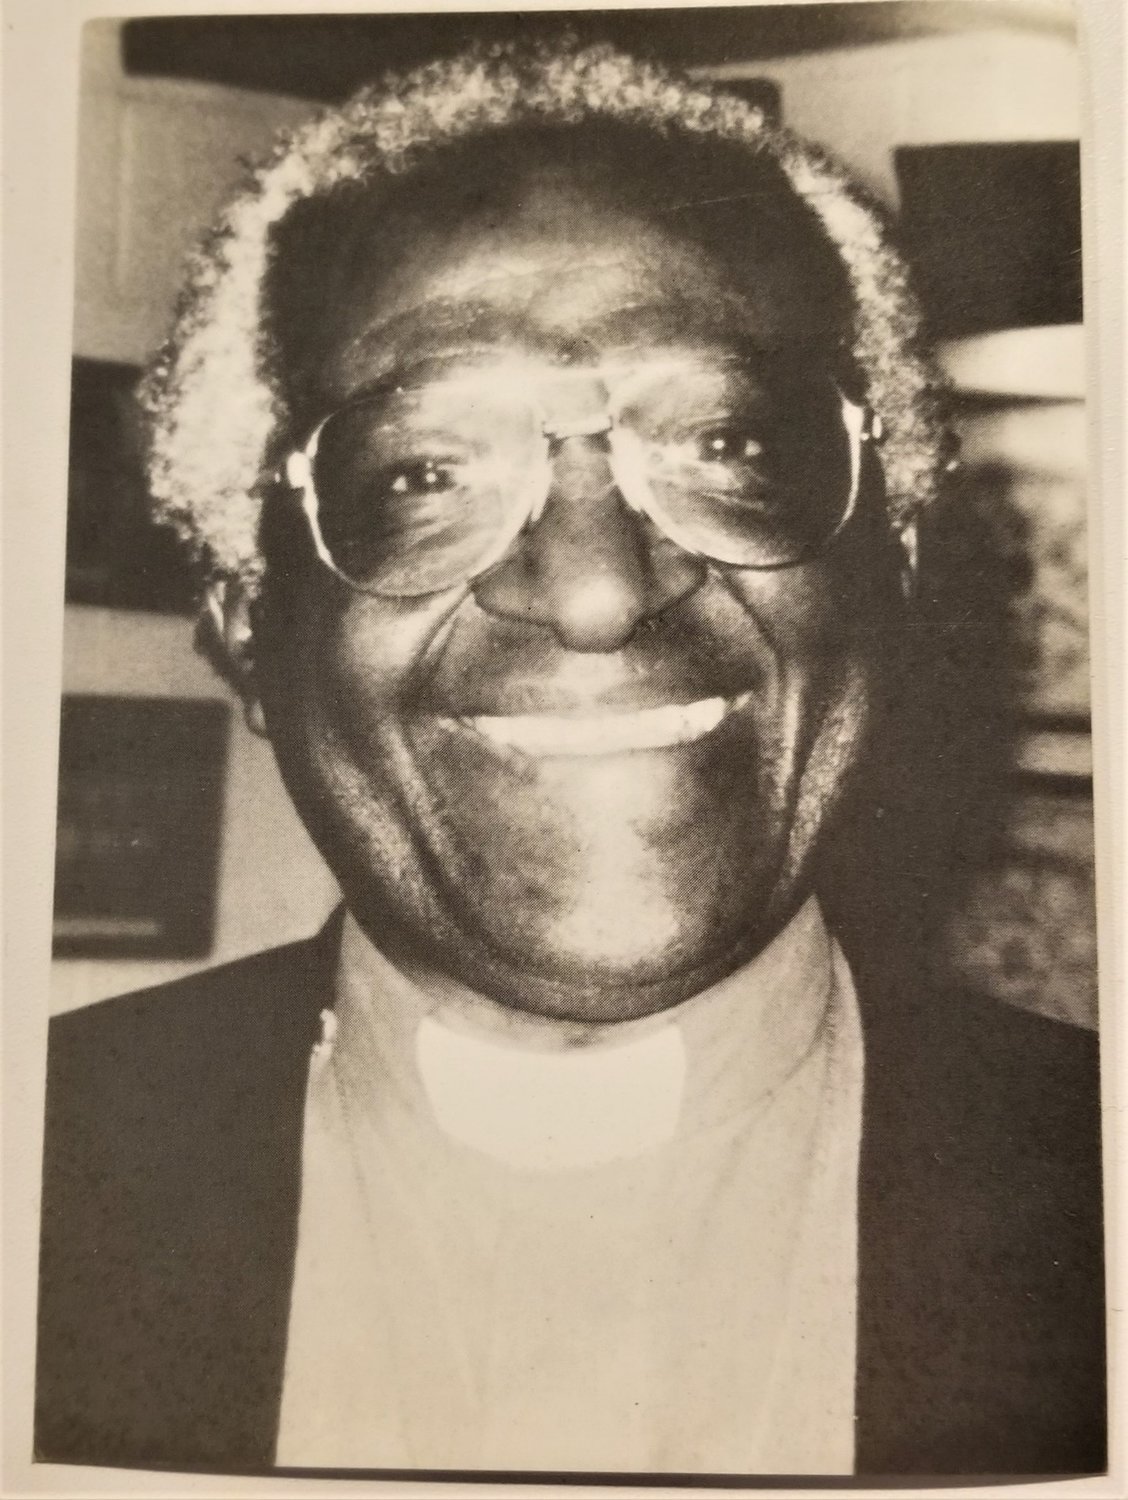 Heather Bobbitt has kept this postcard picture of Desmond Tutu taped in her kitchen every day since 1999. “His wonderful smile making me smile all the years since,” she said.